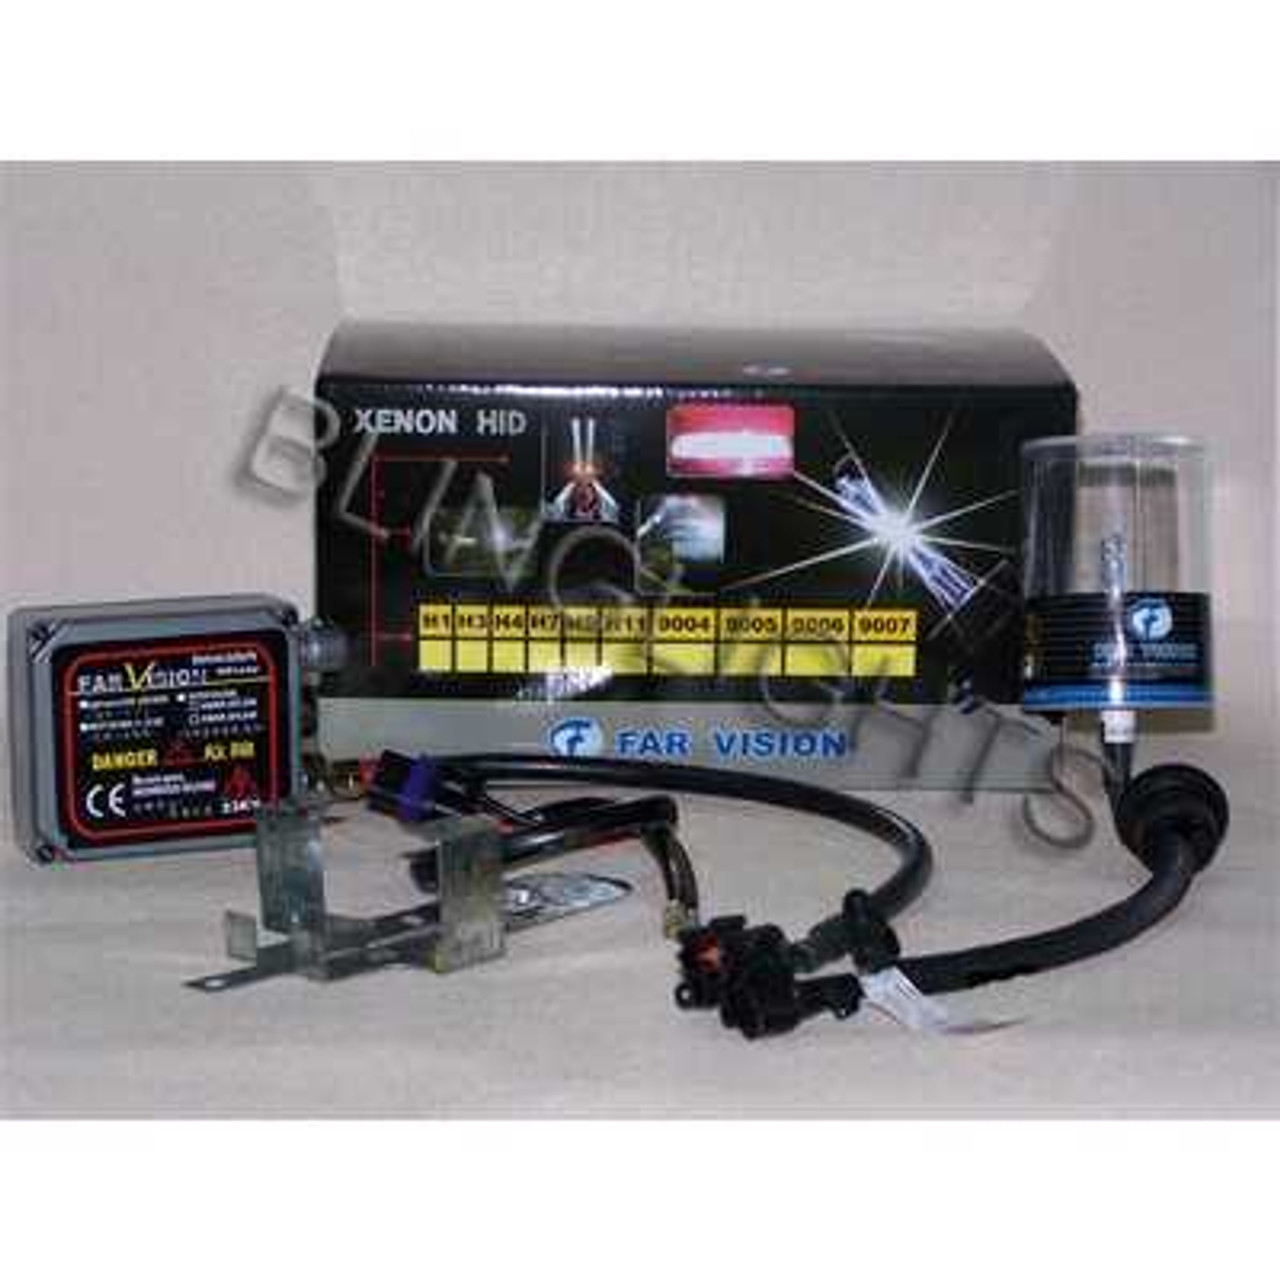 H9 3000K Gold Yellow 55 Watts Xenon HID Lamp Conversion Kit VHO 55Watts 55w HIDs from Japan